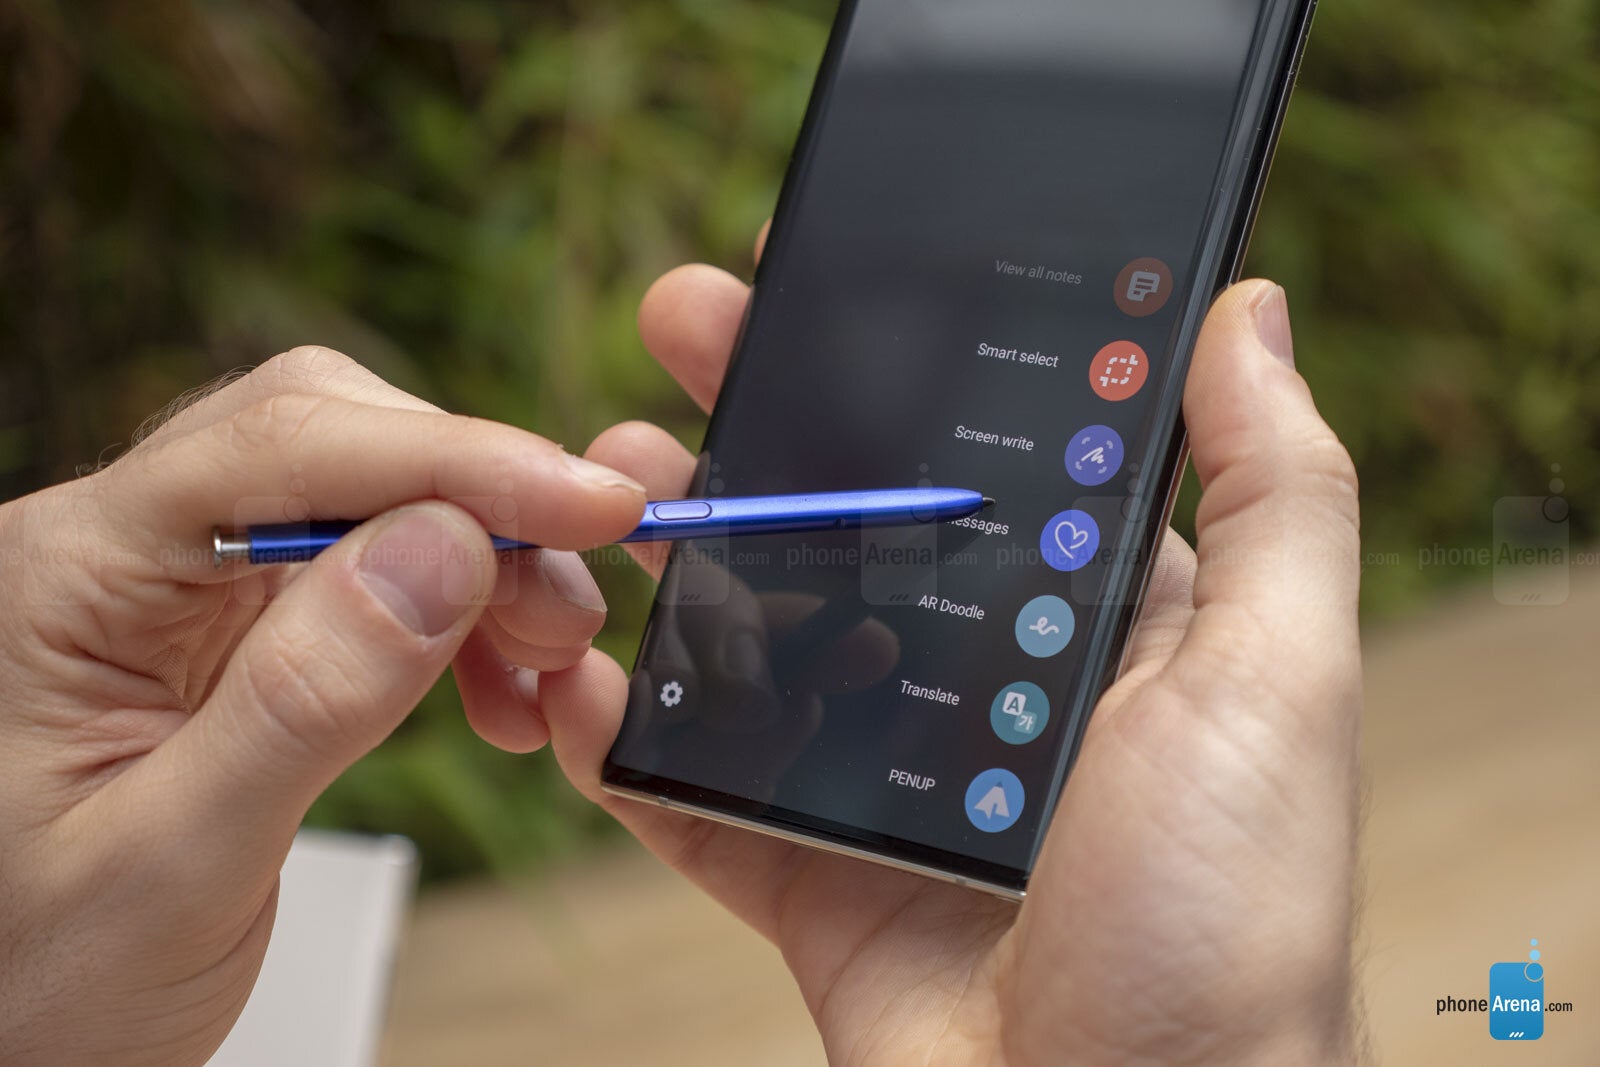 Samsung Galaxy Note 10/10+ are Android refined to perfection, but no great risks taken (hands-on)